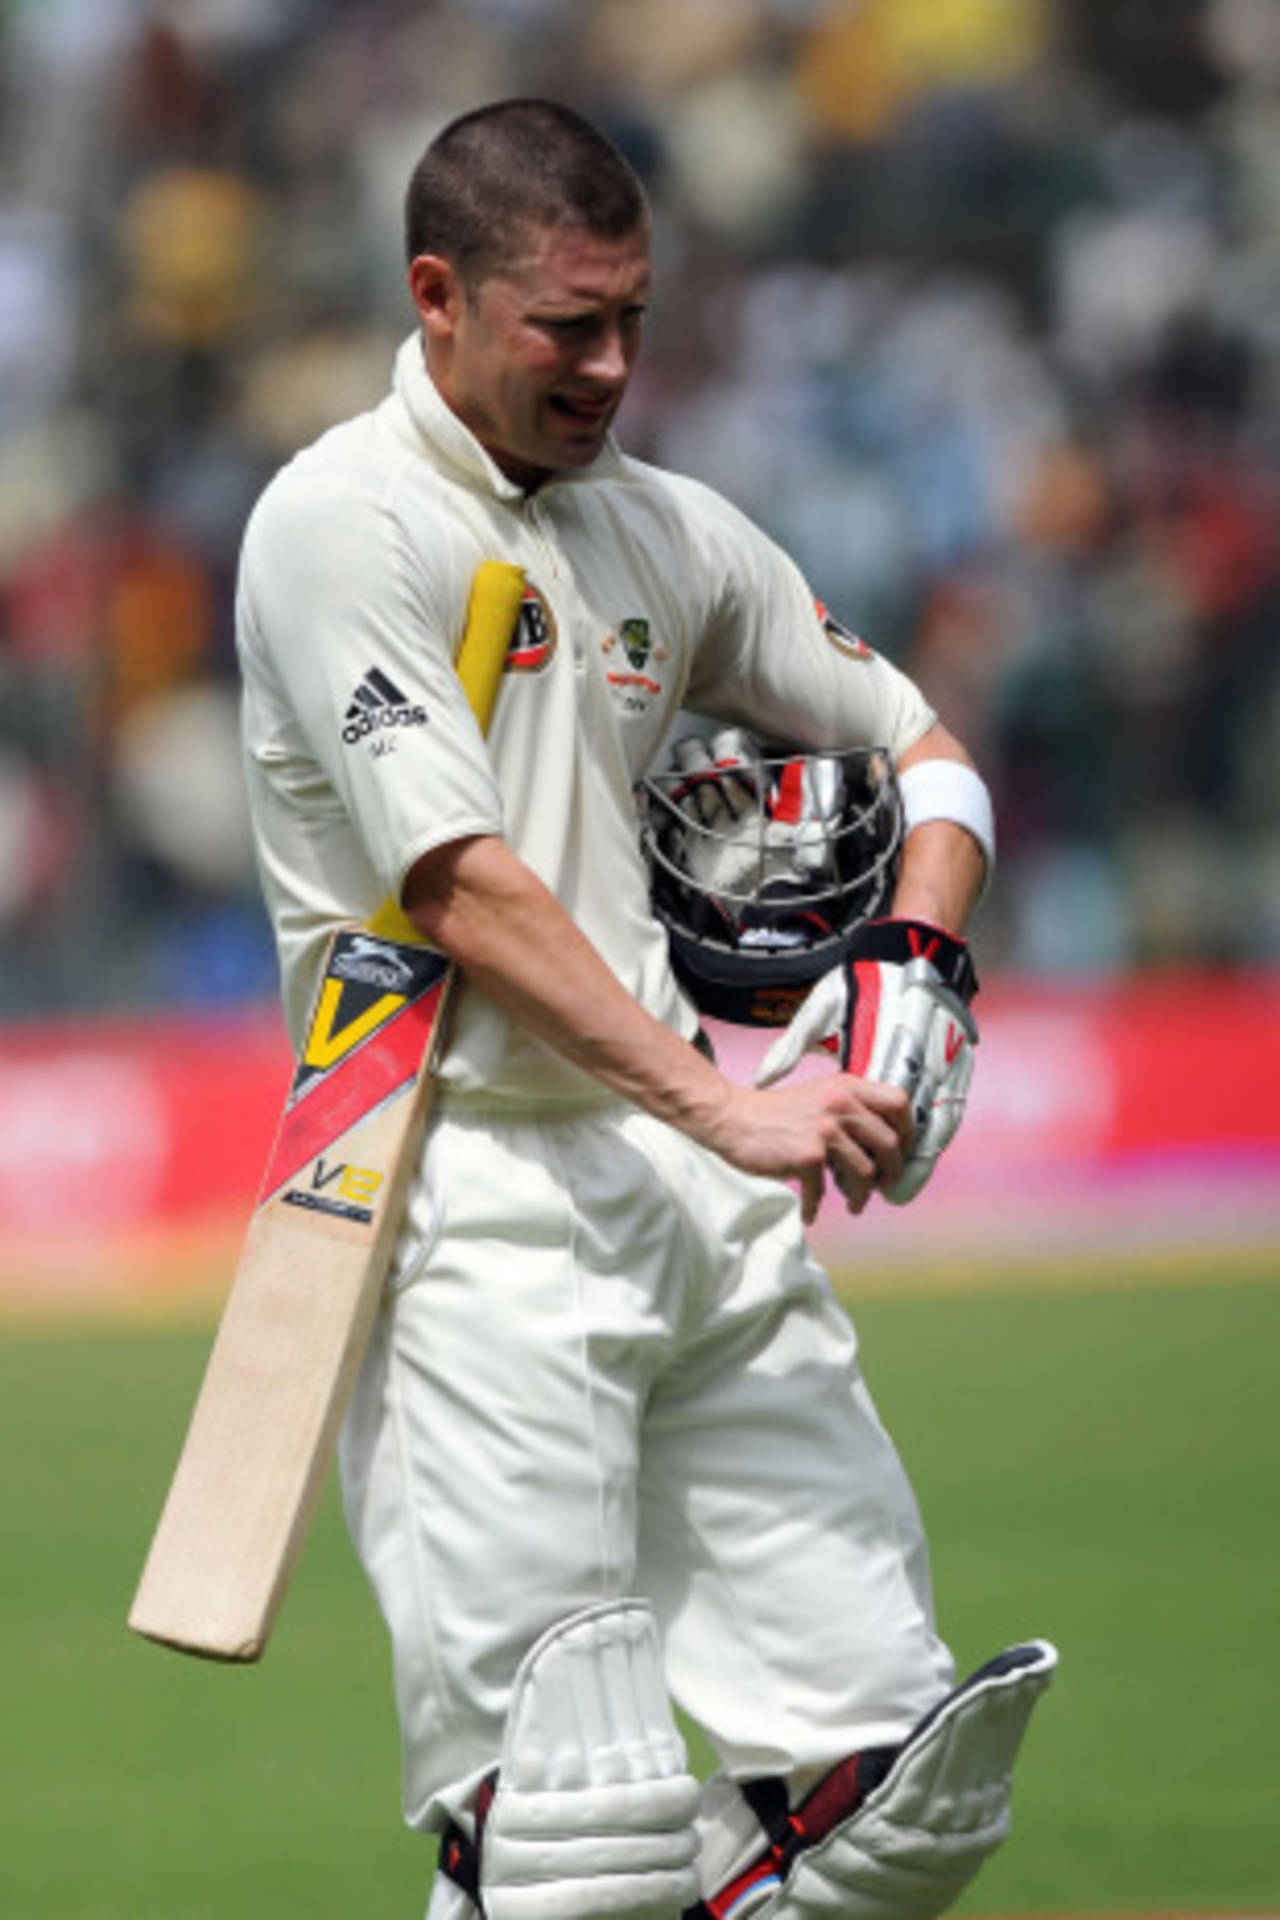 Michael Clarke trudges disconsolately back to the dressing room after being stumped, India v Australia, 2nd Test, Bangalore, 4th day, October 12, 2010